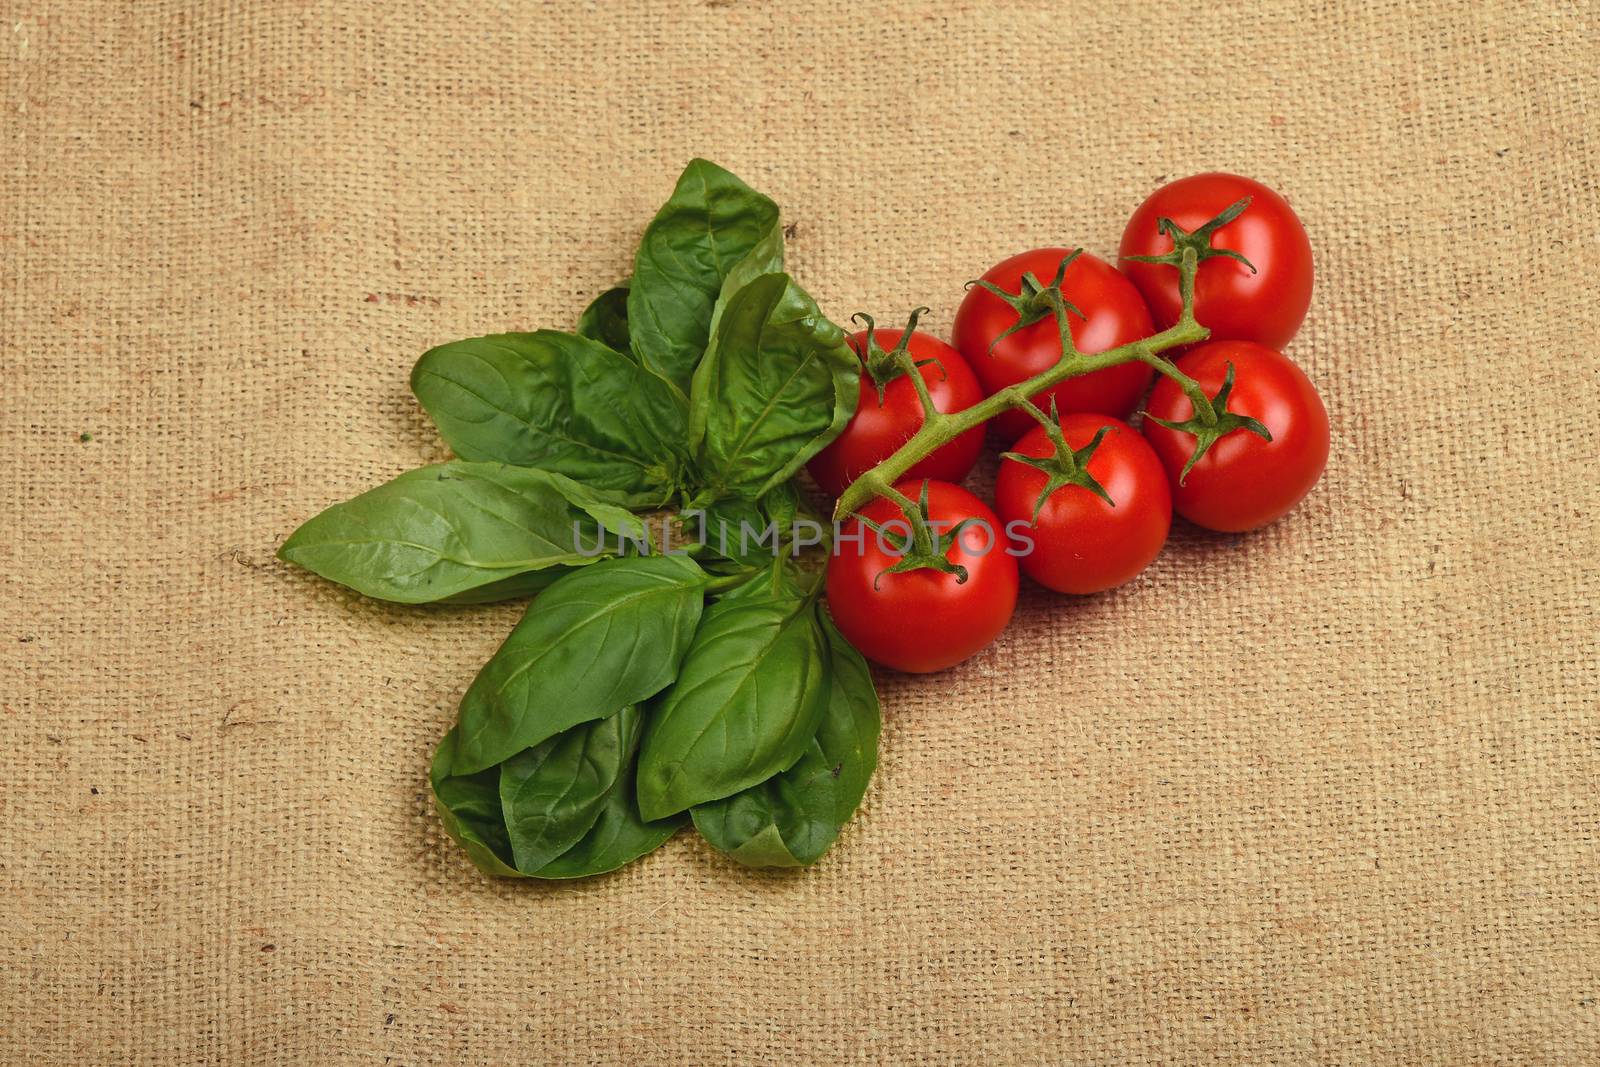 Bunch of six red ripe cherry tomato and fresh basil leaves at jute canvas burlap background